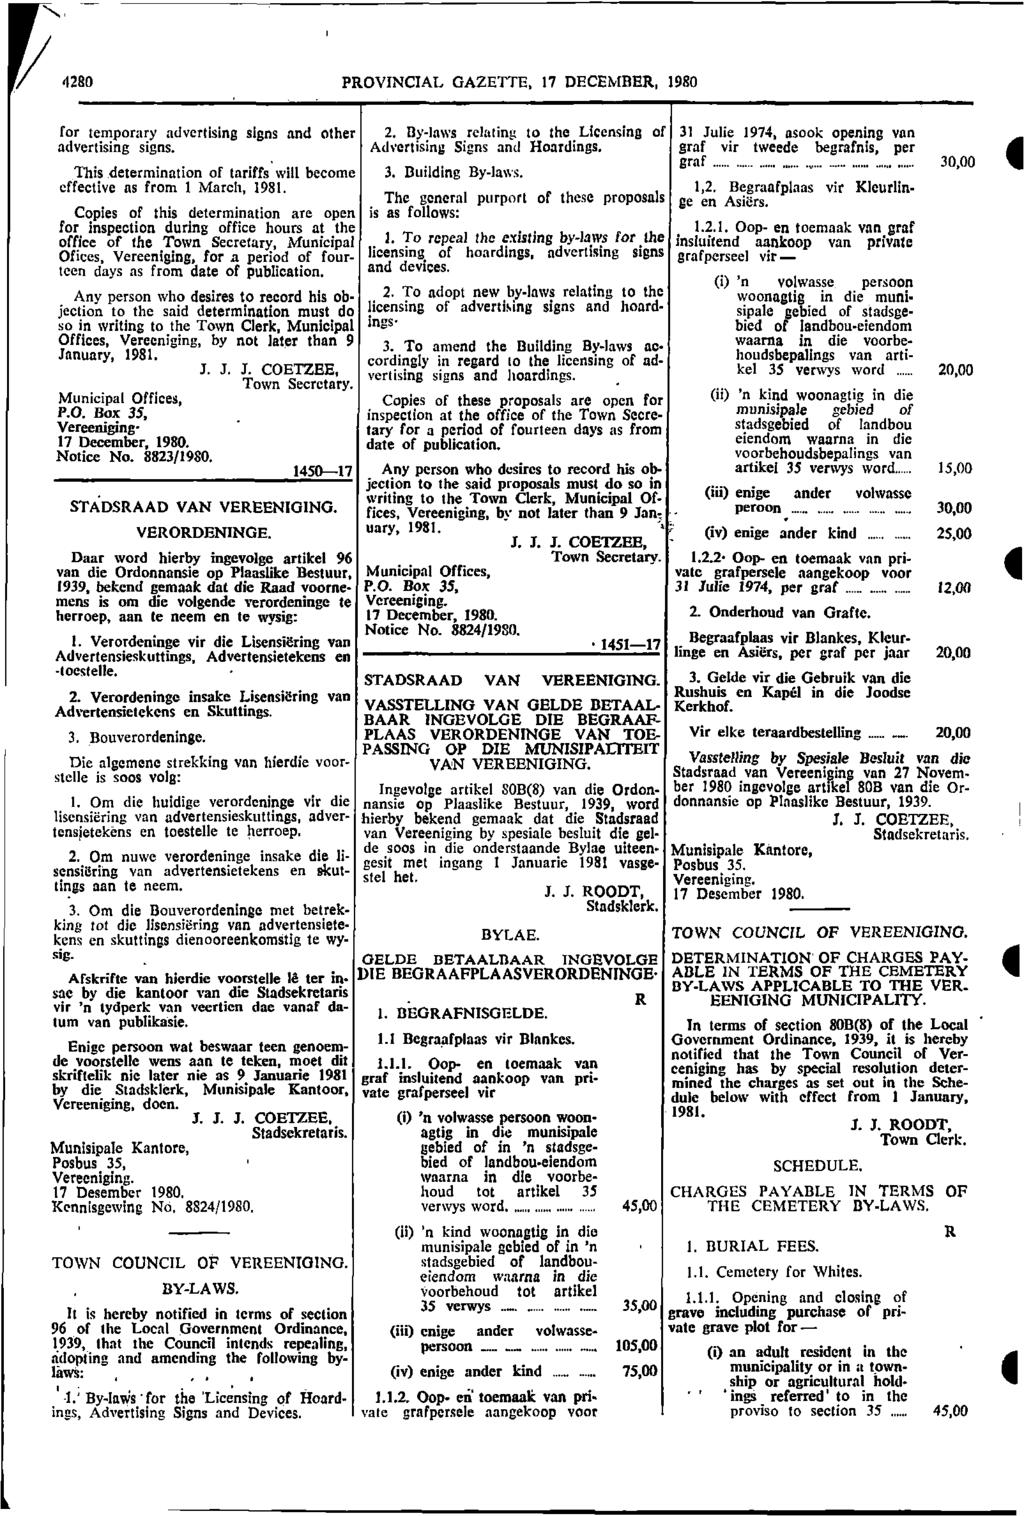 N 4280 PROVINCIAL GAZETTE, 17 DECEMBER, 1980 for temporary advertising signs and other advertising signs. This determination of tariffs will become effective ns from 1 March, 1981.